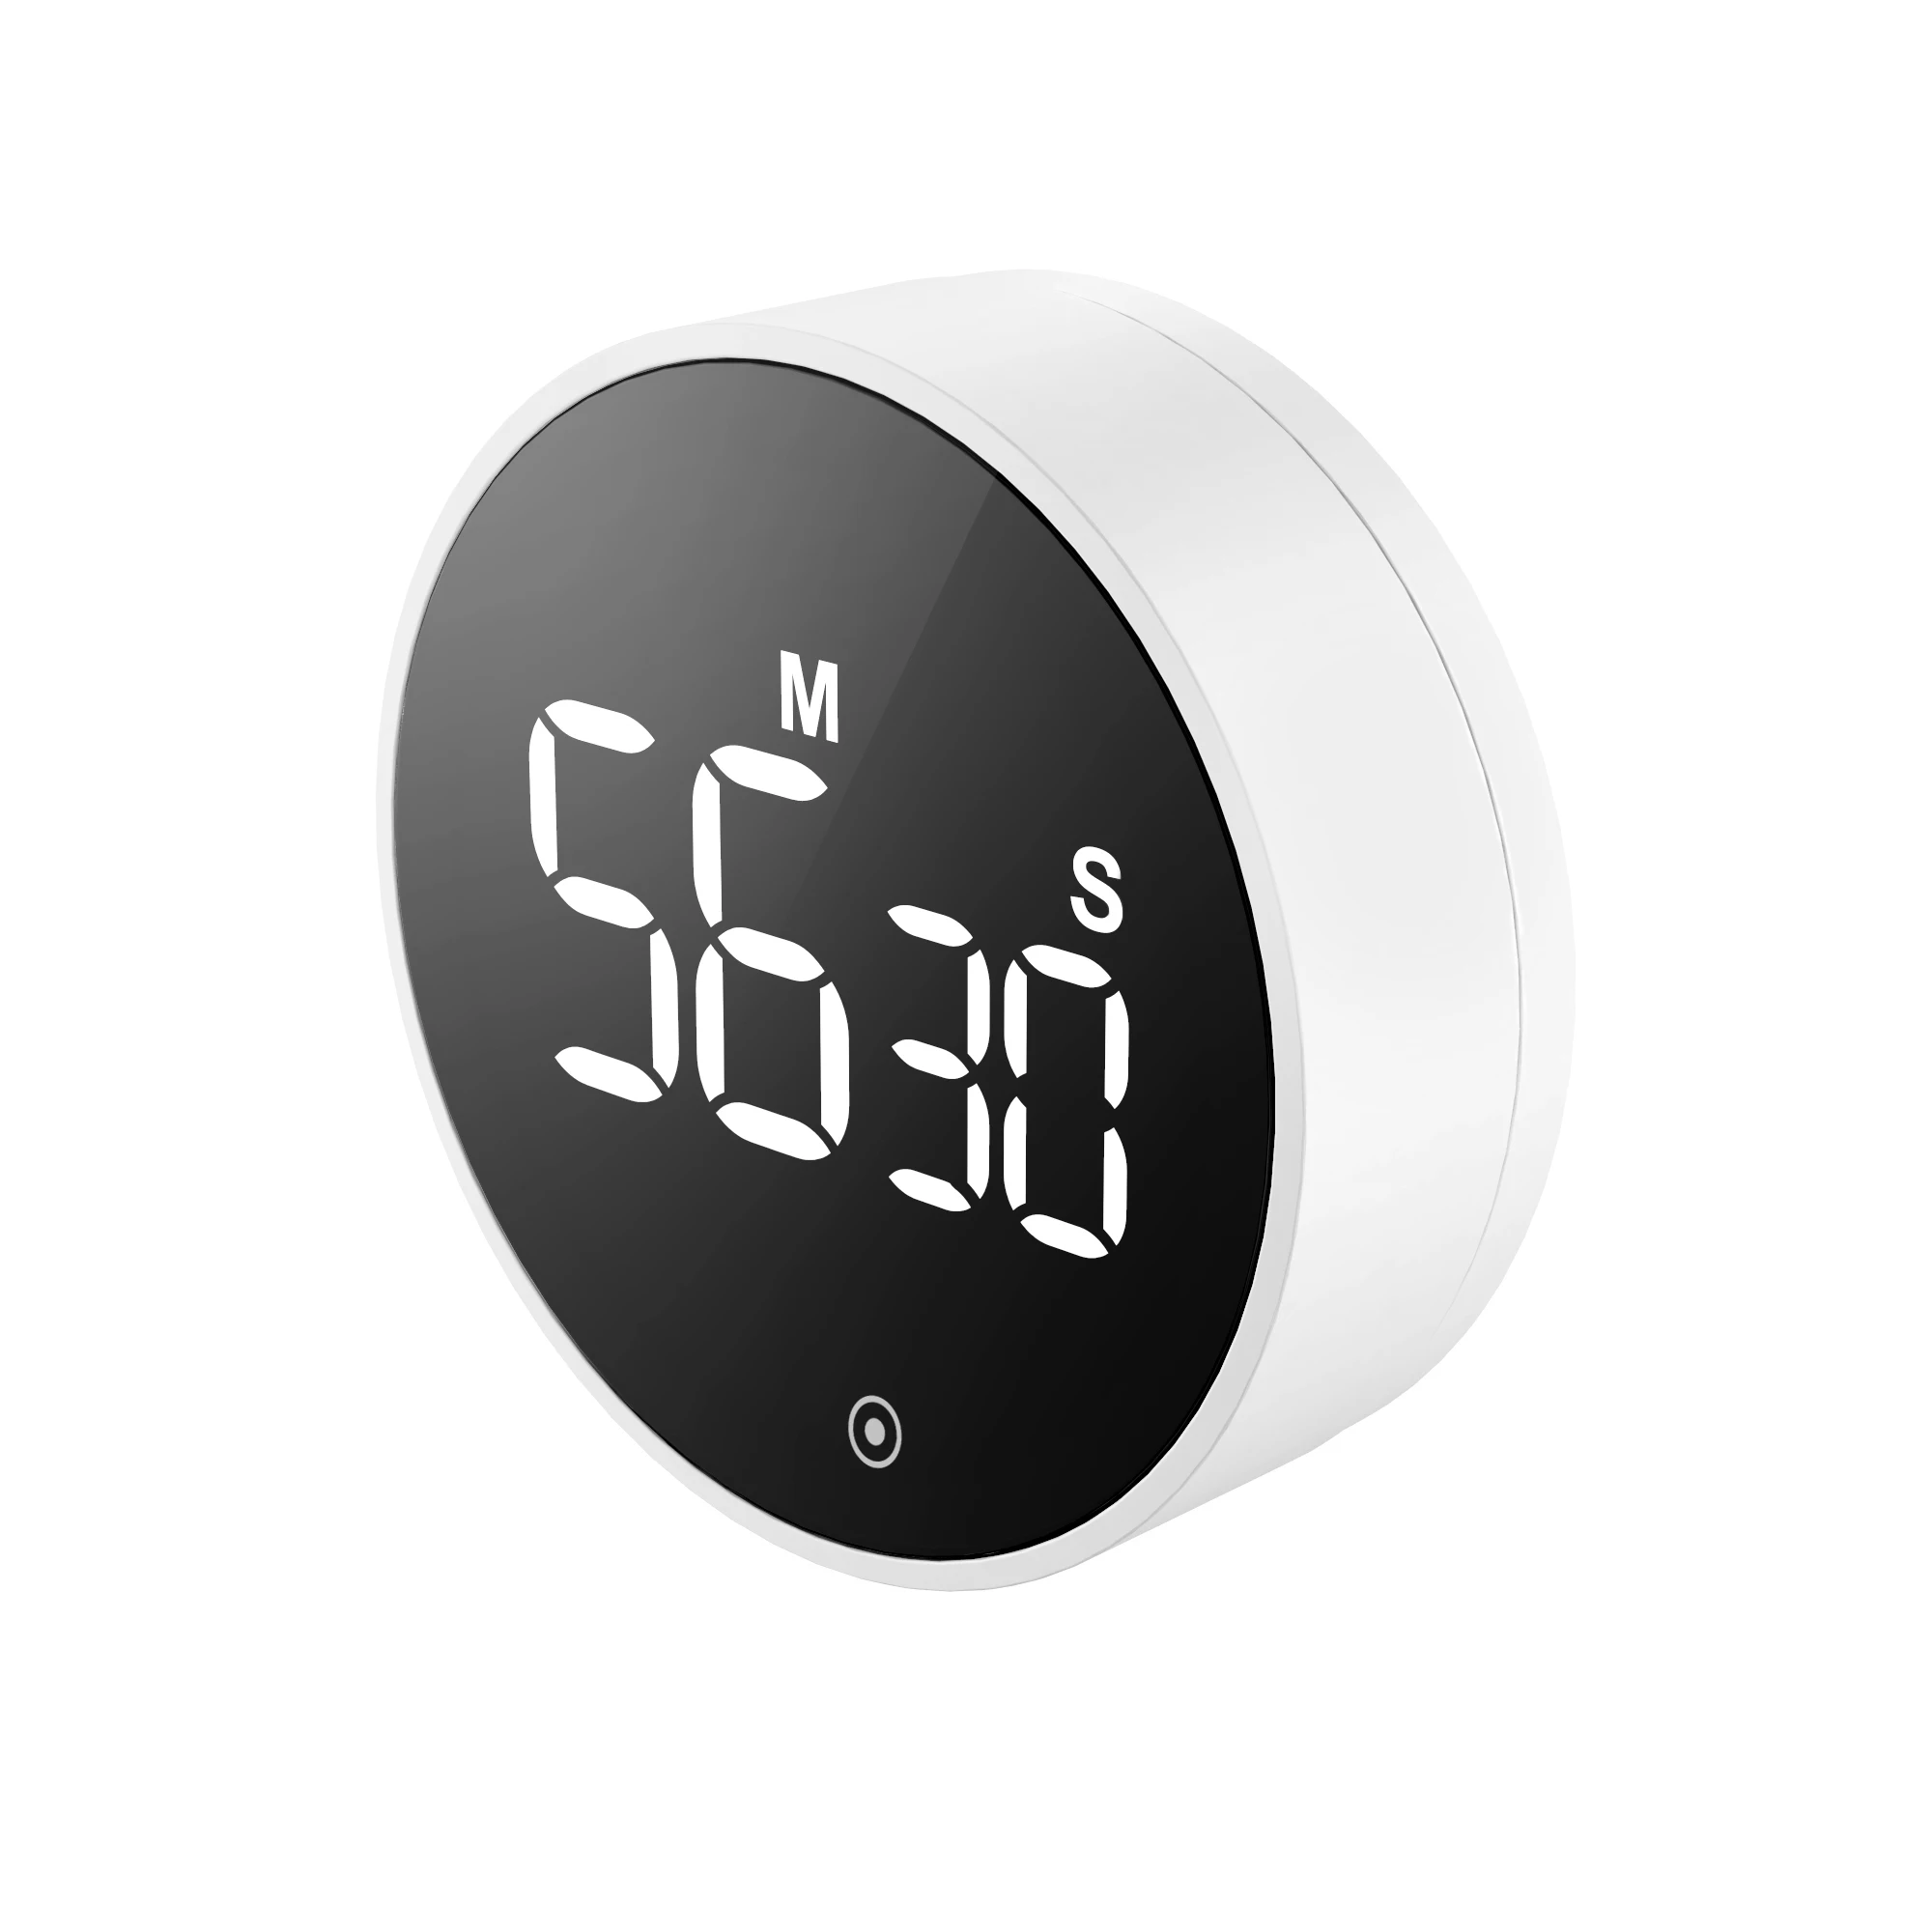 Kitchen Cooking Shower Timer Training Stopwatch Alarm Clock Electronic Cooking  Clock Countdown Timer Magnetic LED Digital LCD Display